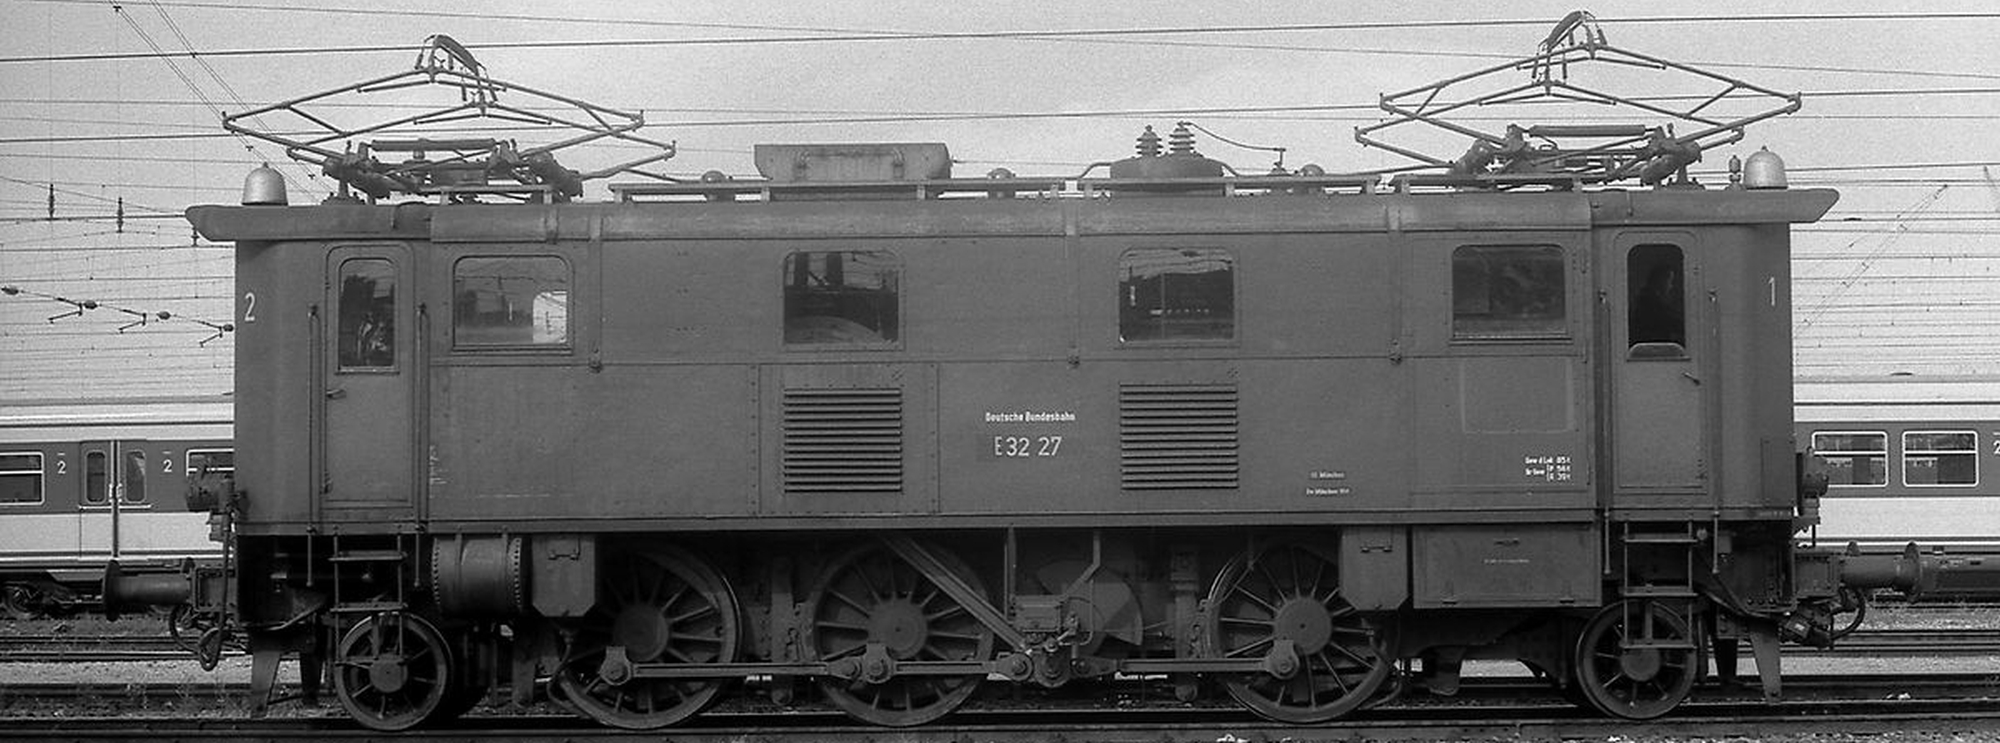 E 32 27 with old number in October 1971 in Munich